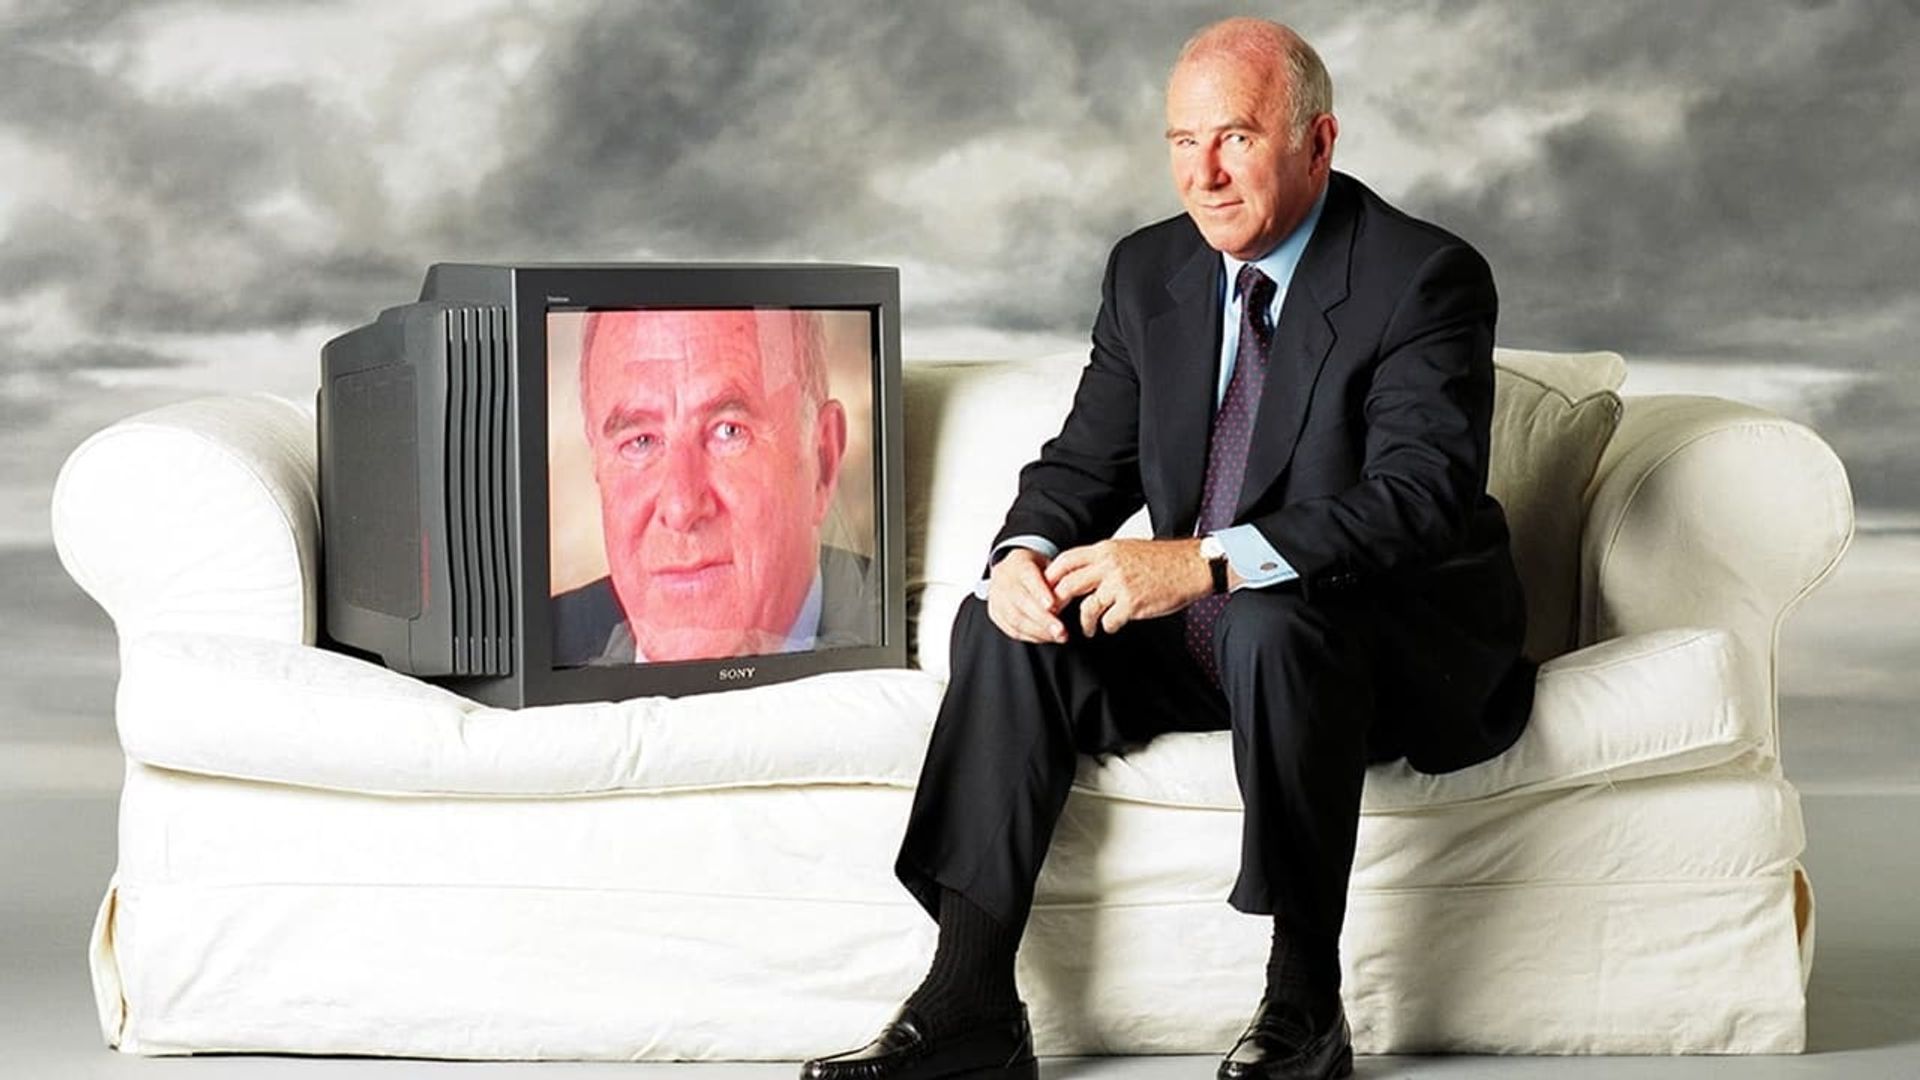 Clive James on Television background